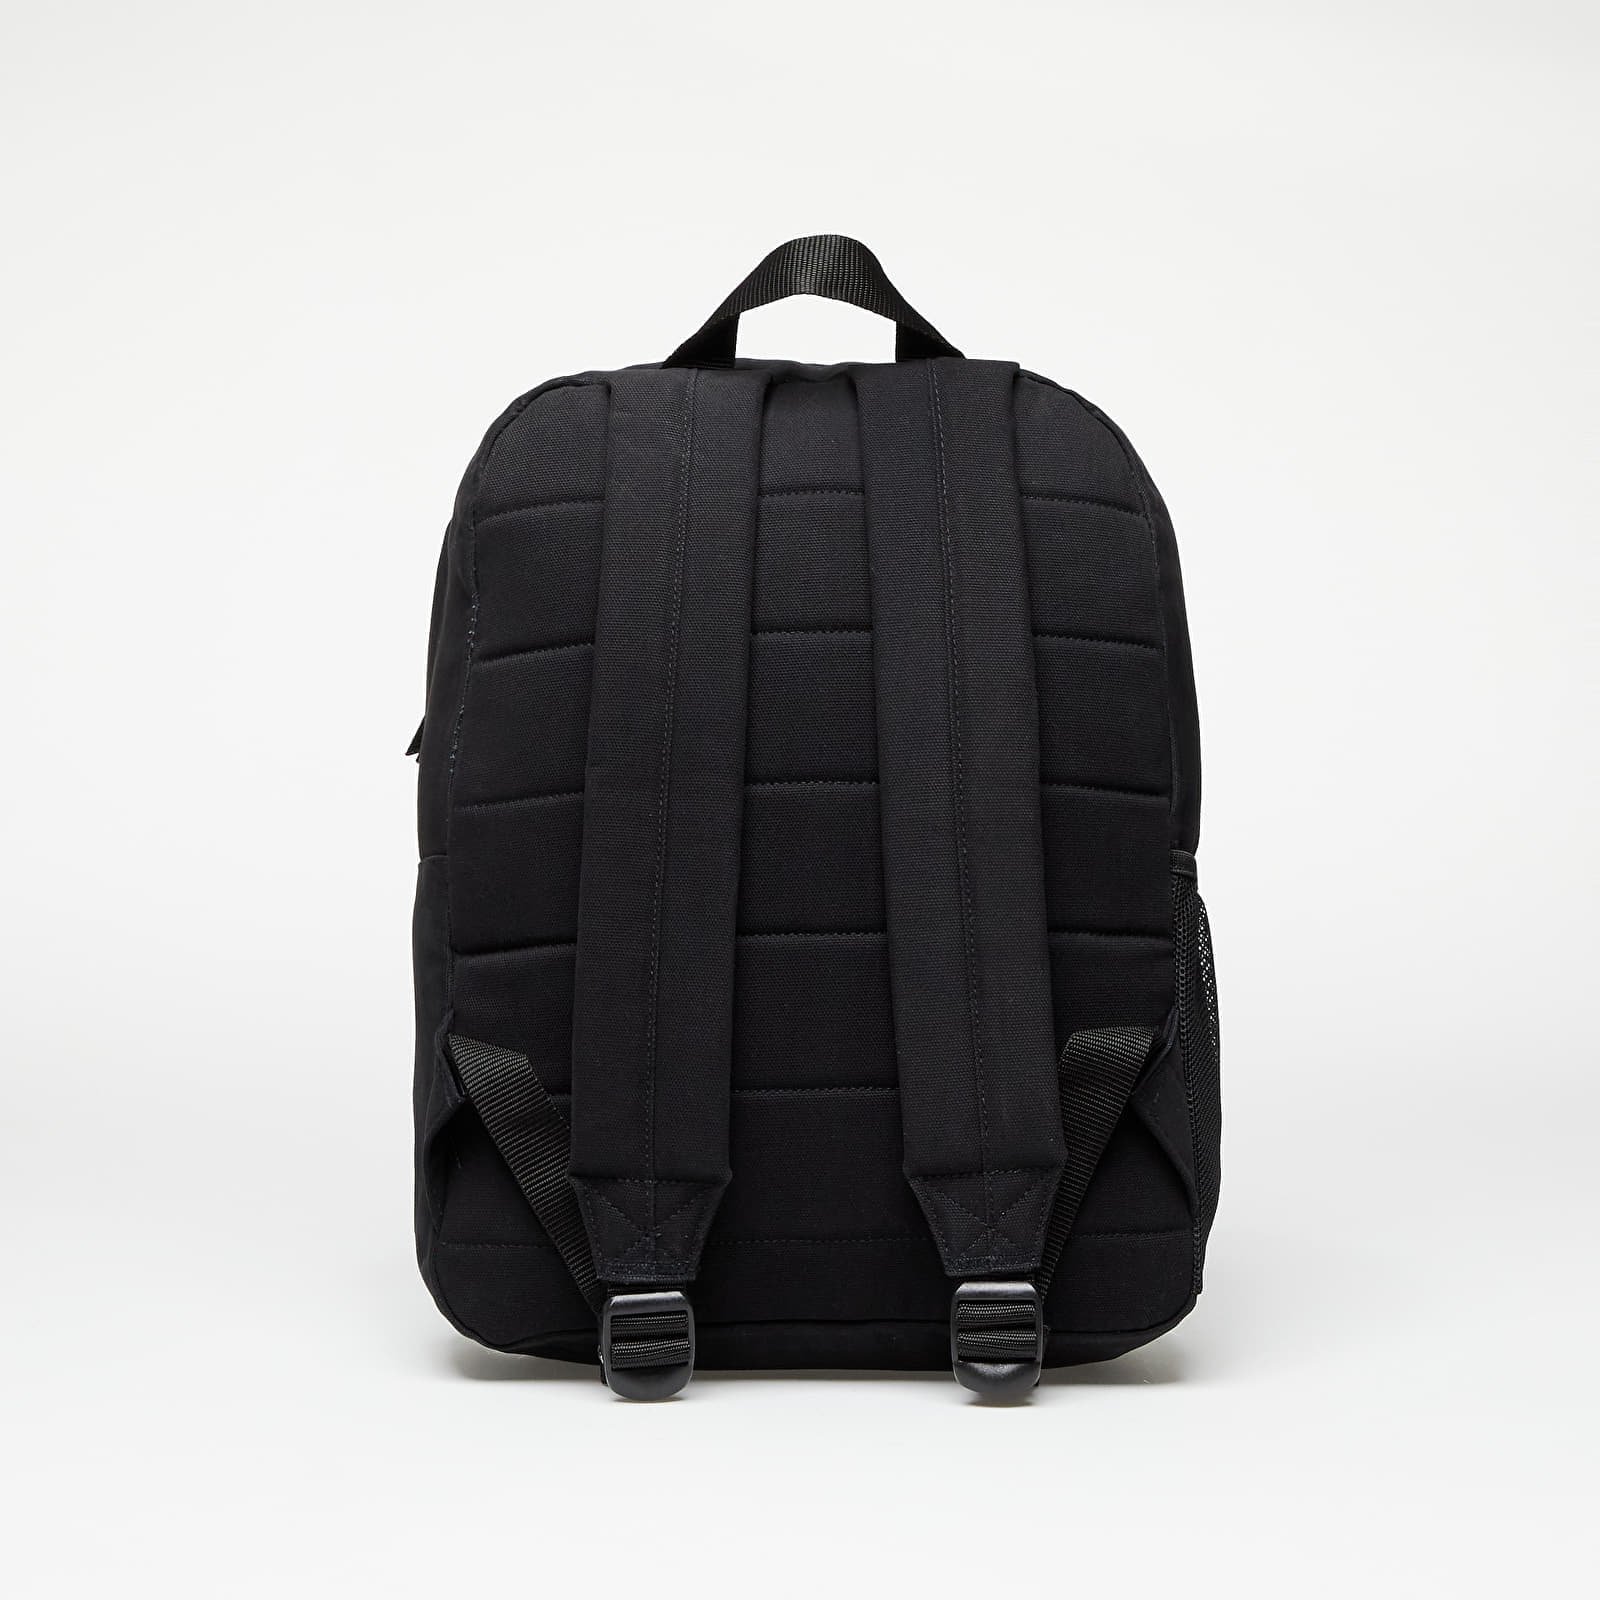 Duck Canvas Backpack Black